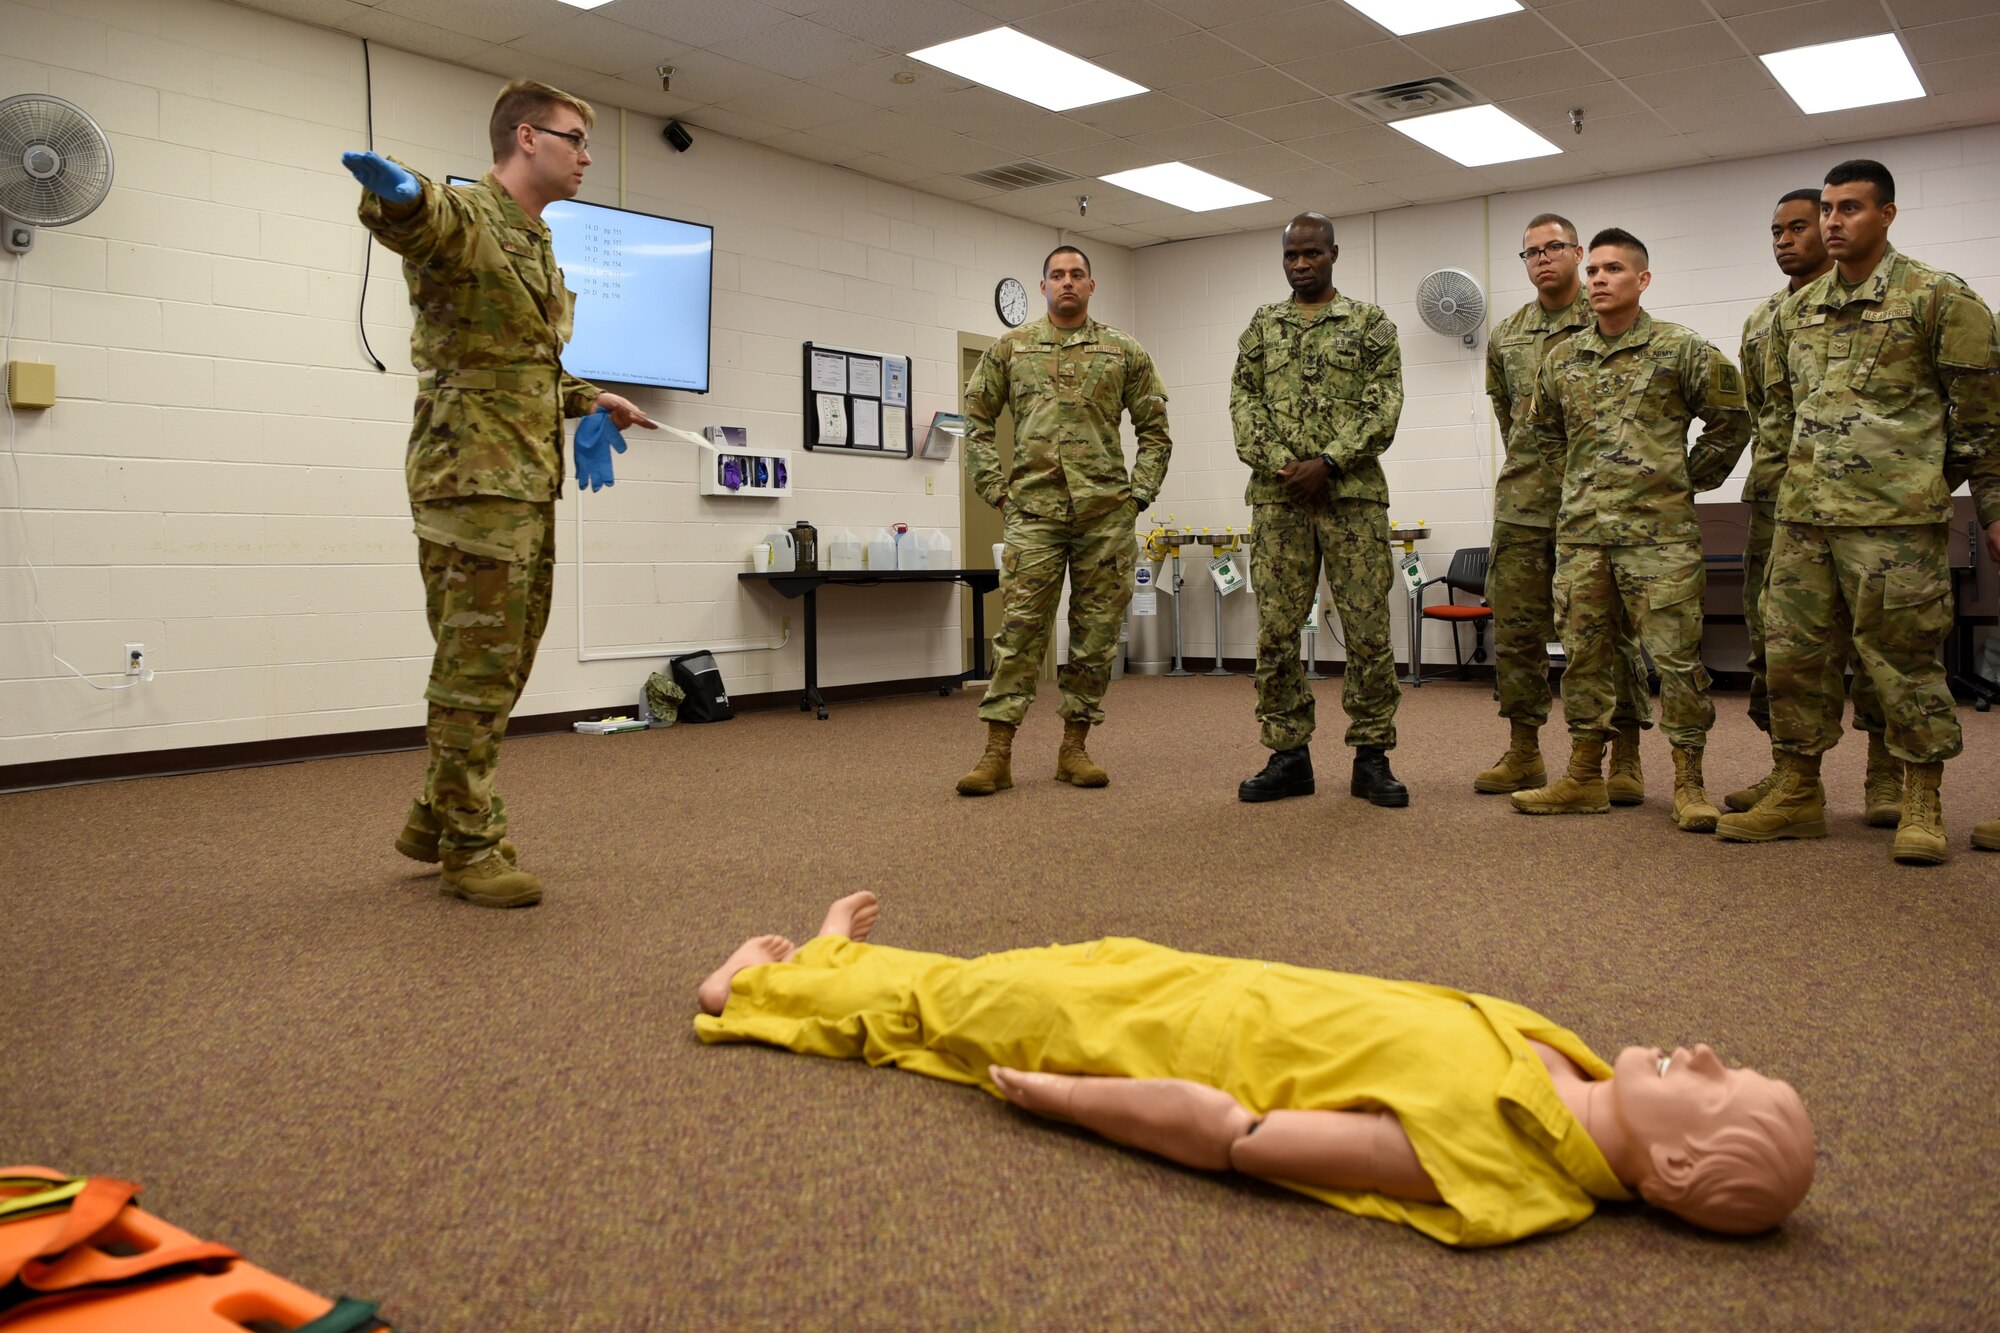 U.S. Air Force Staff Sgt. Robert Kirkpatrick, 312th Training Squadron instructor, teaches his students Emergency Medical Responder skills before a psychomotor evaluation at Goodfellow Air Force Base, Texas, May 6, 2022. Kirkpatrick passed an instructor qualification exam which was EMR specific for the Louis F. Garland Department of Defense Fire Academy. (U.S. Air Force photo by Senior Airman Abbey Rieves)